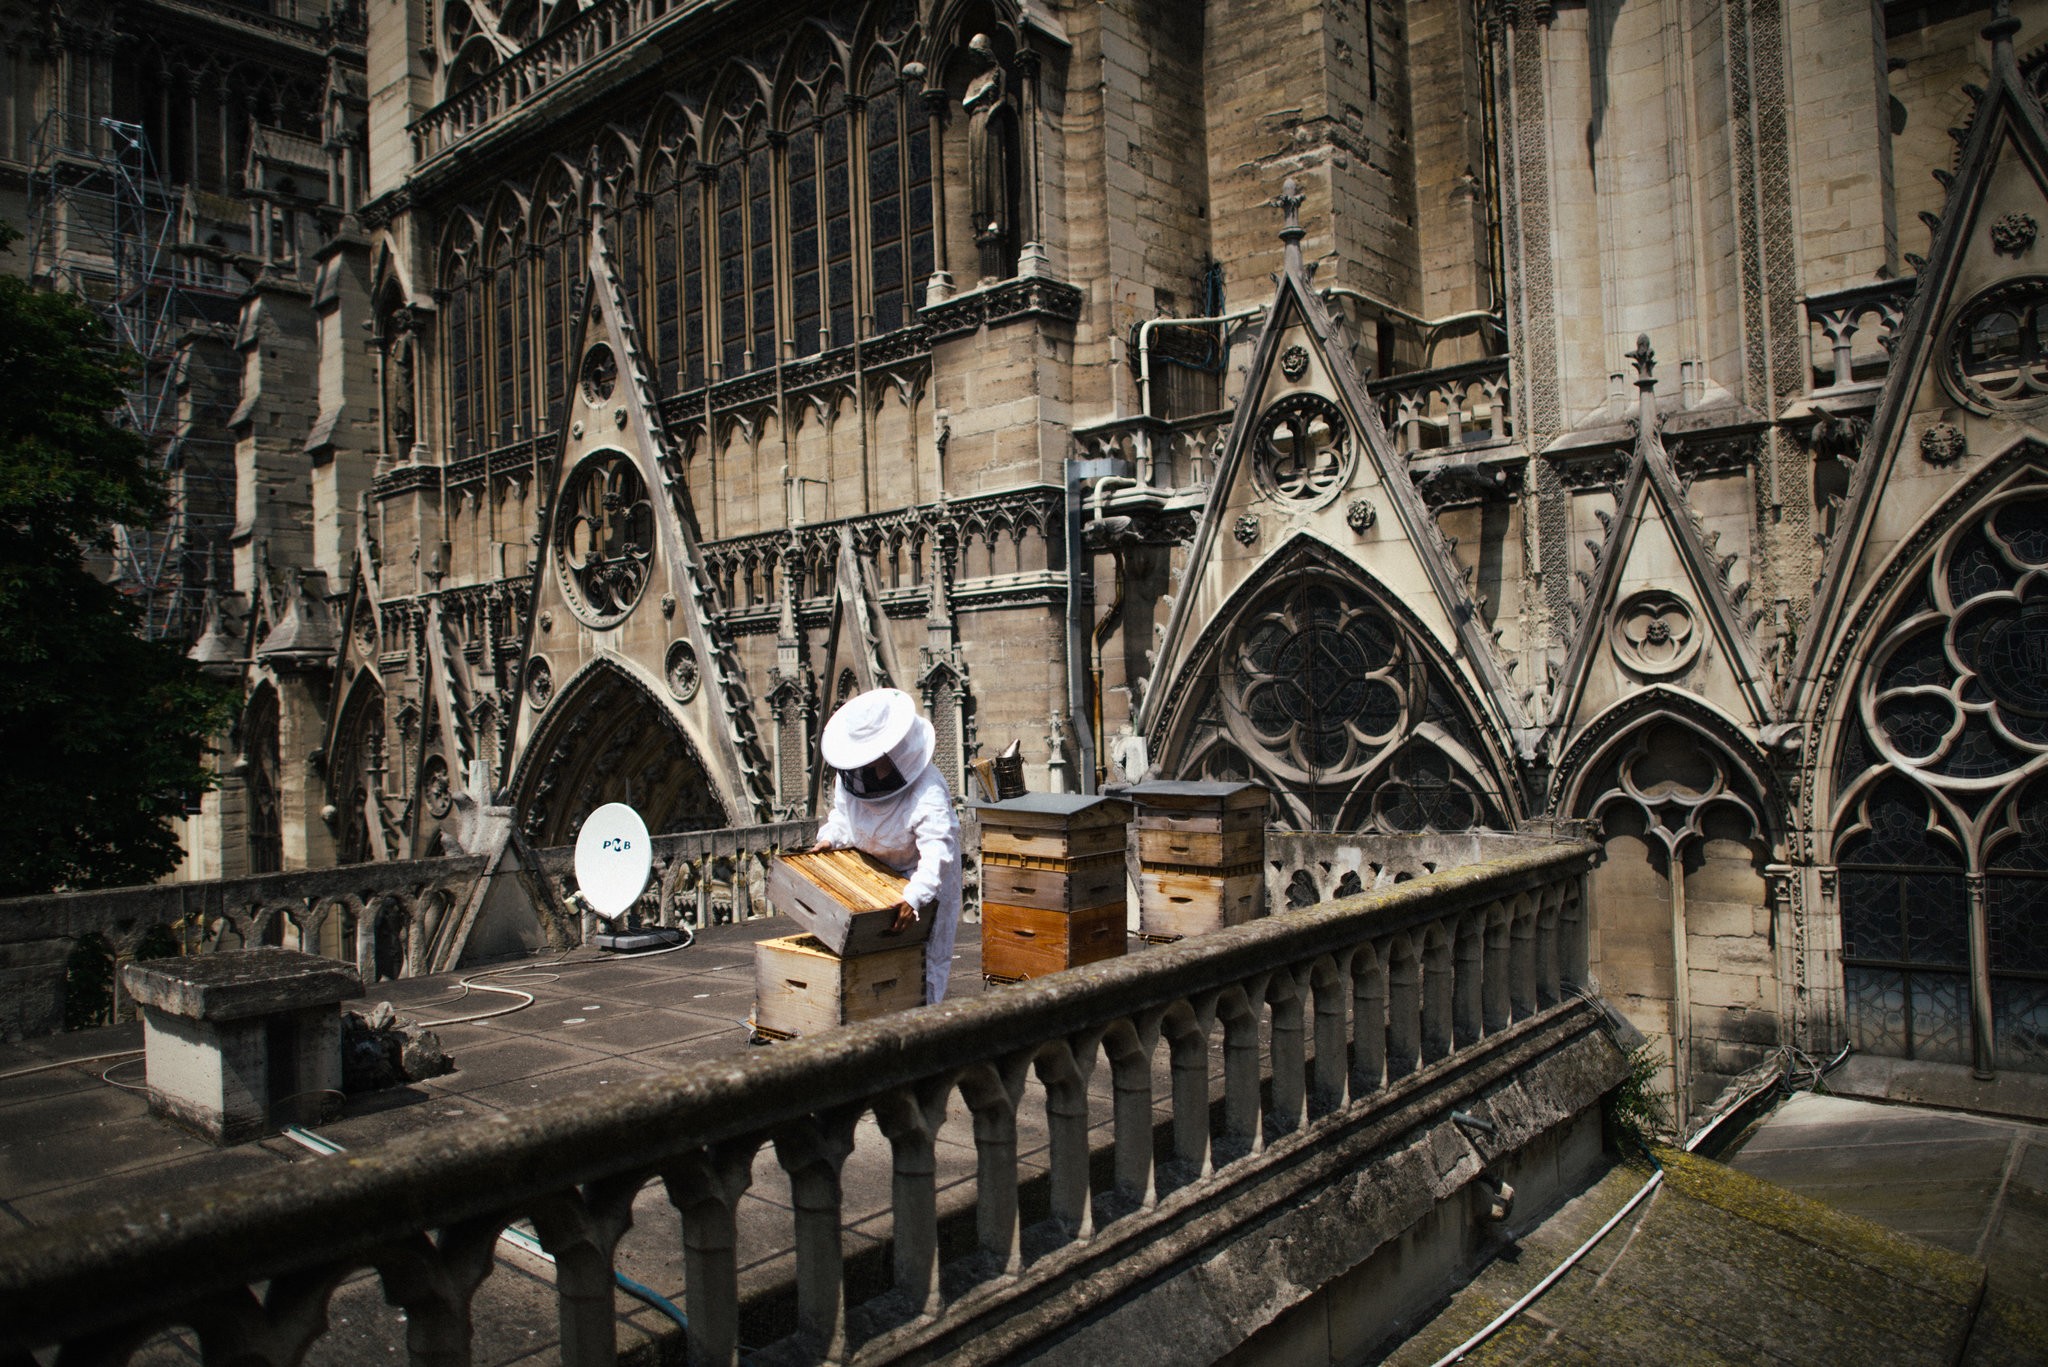  Sibyle Moulin, a beekeeper, tending to hives on the roof of Notre-Dame.   